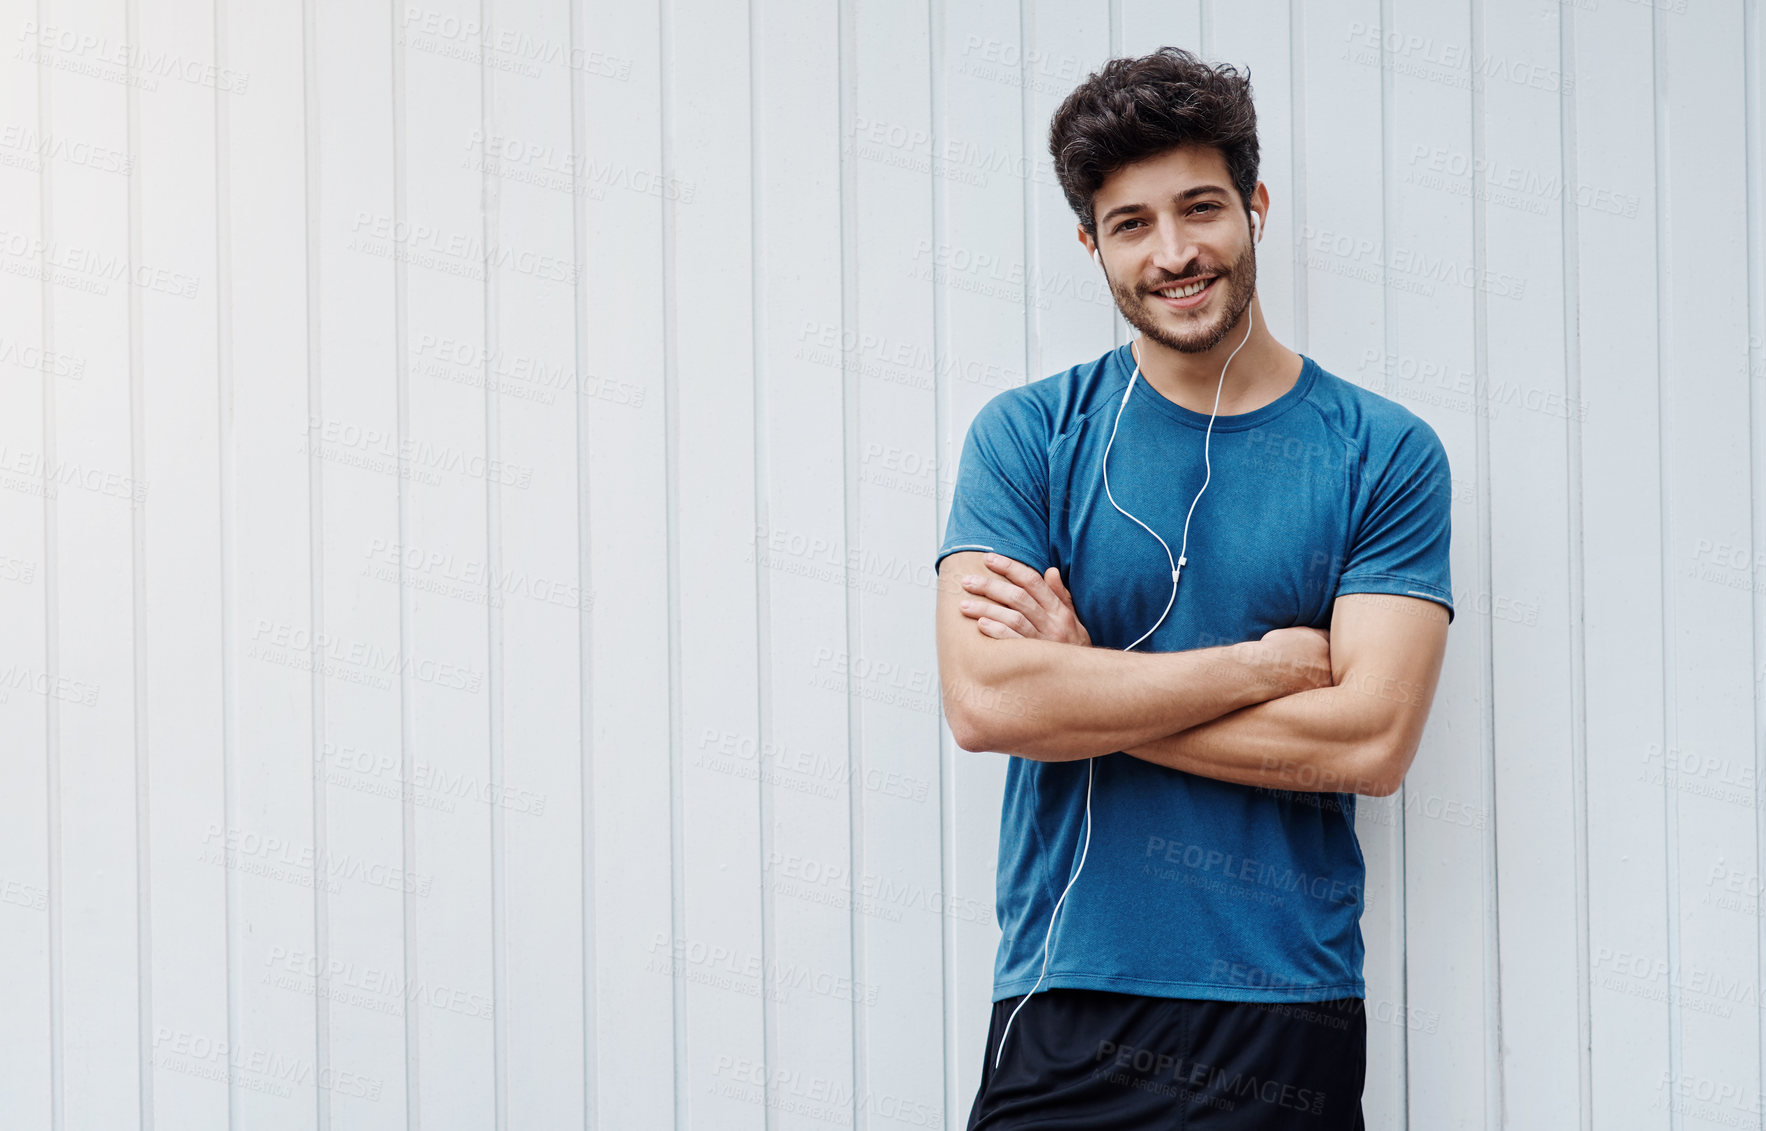 Buy stock photo Portrait of a sporty young man standing against a white wall after exercising outside during the day